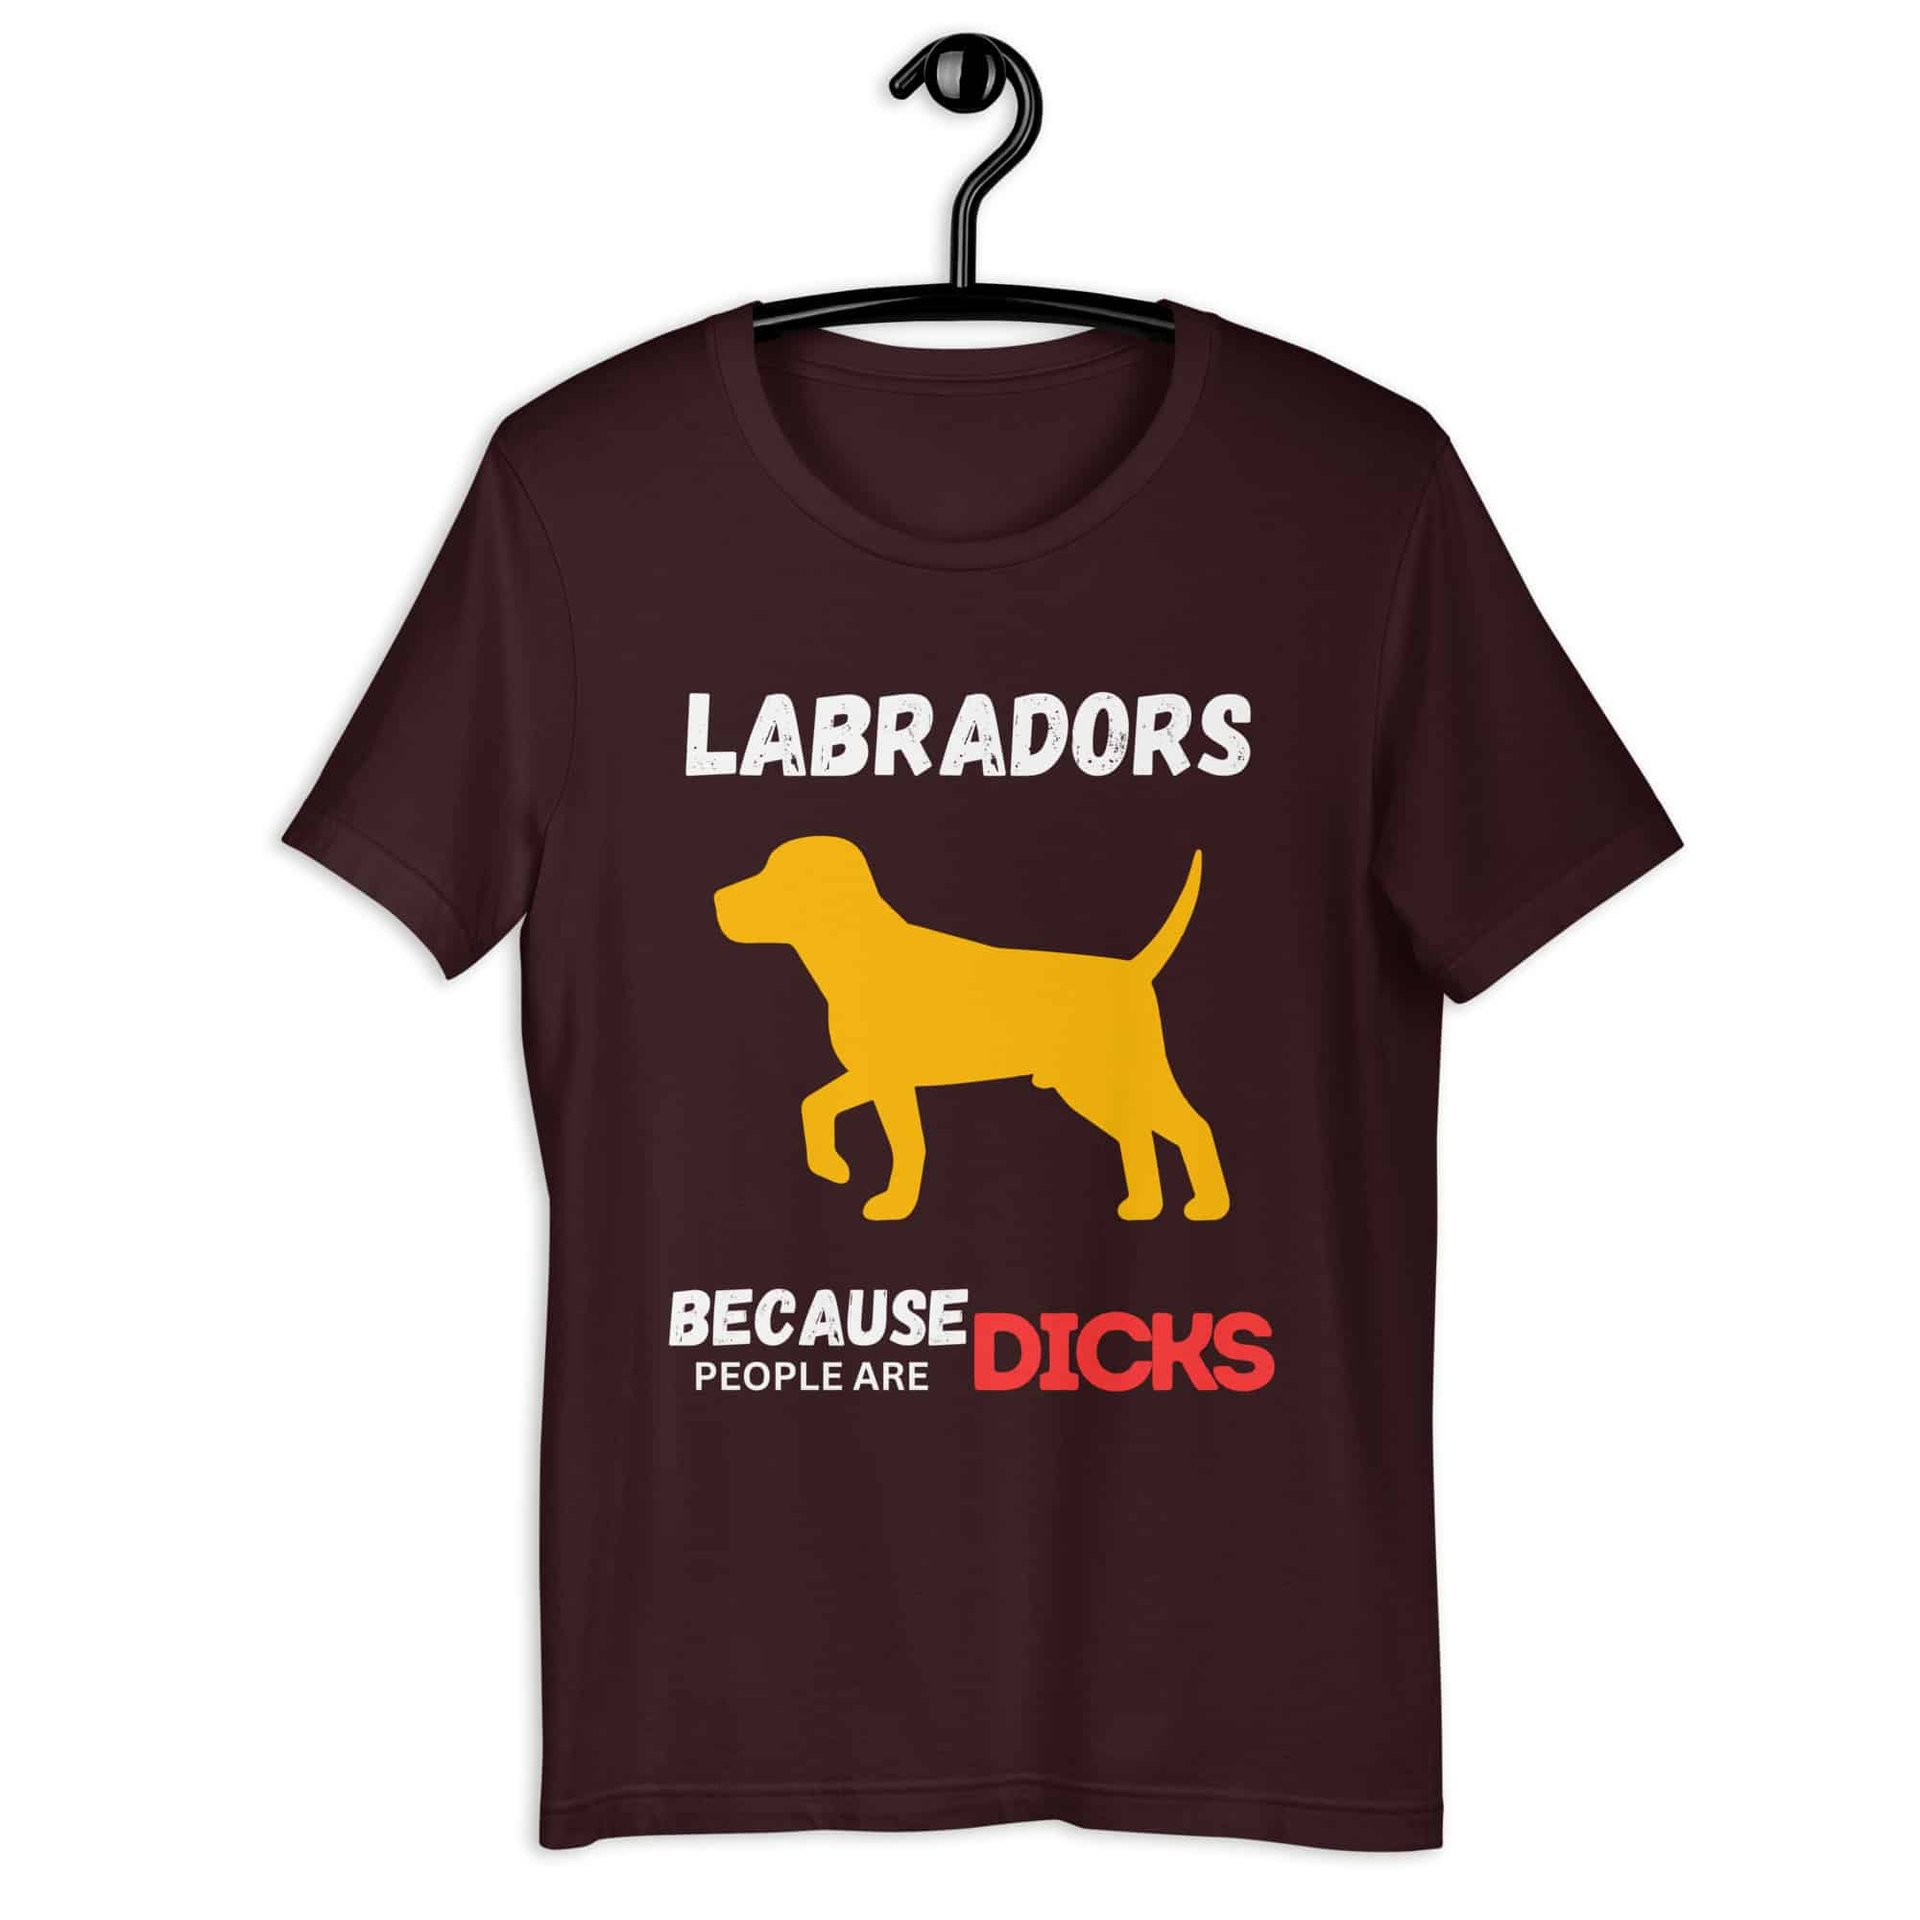 Labrador Because People Are Dicks Unisex T-Shirt Brown